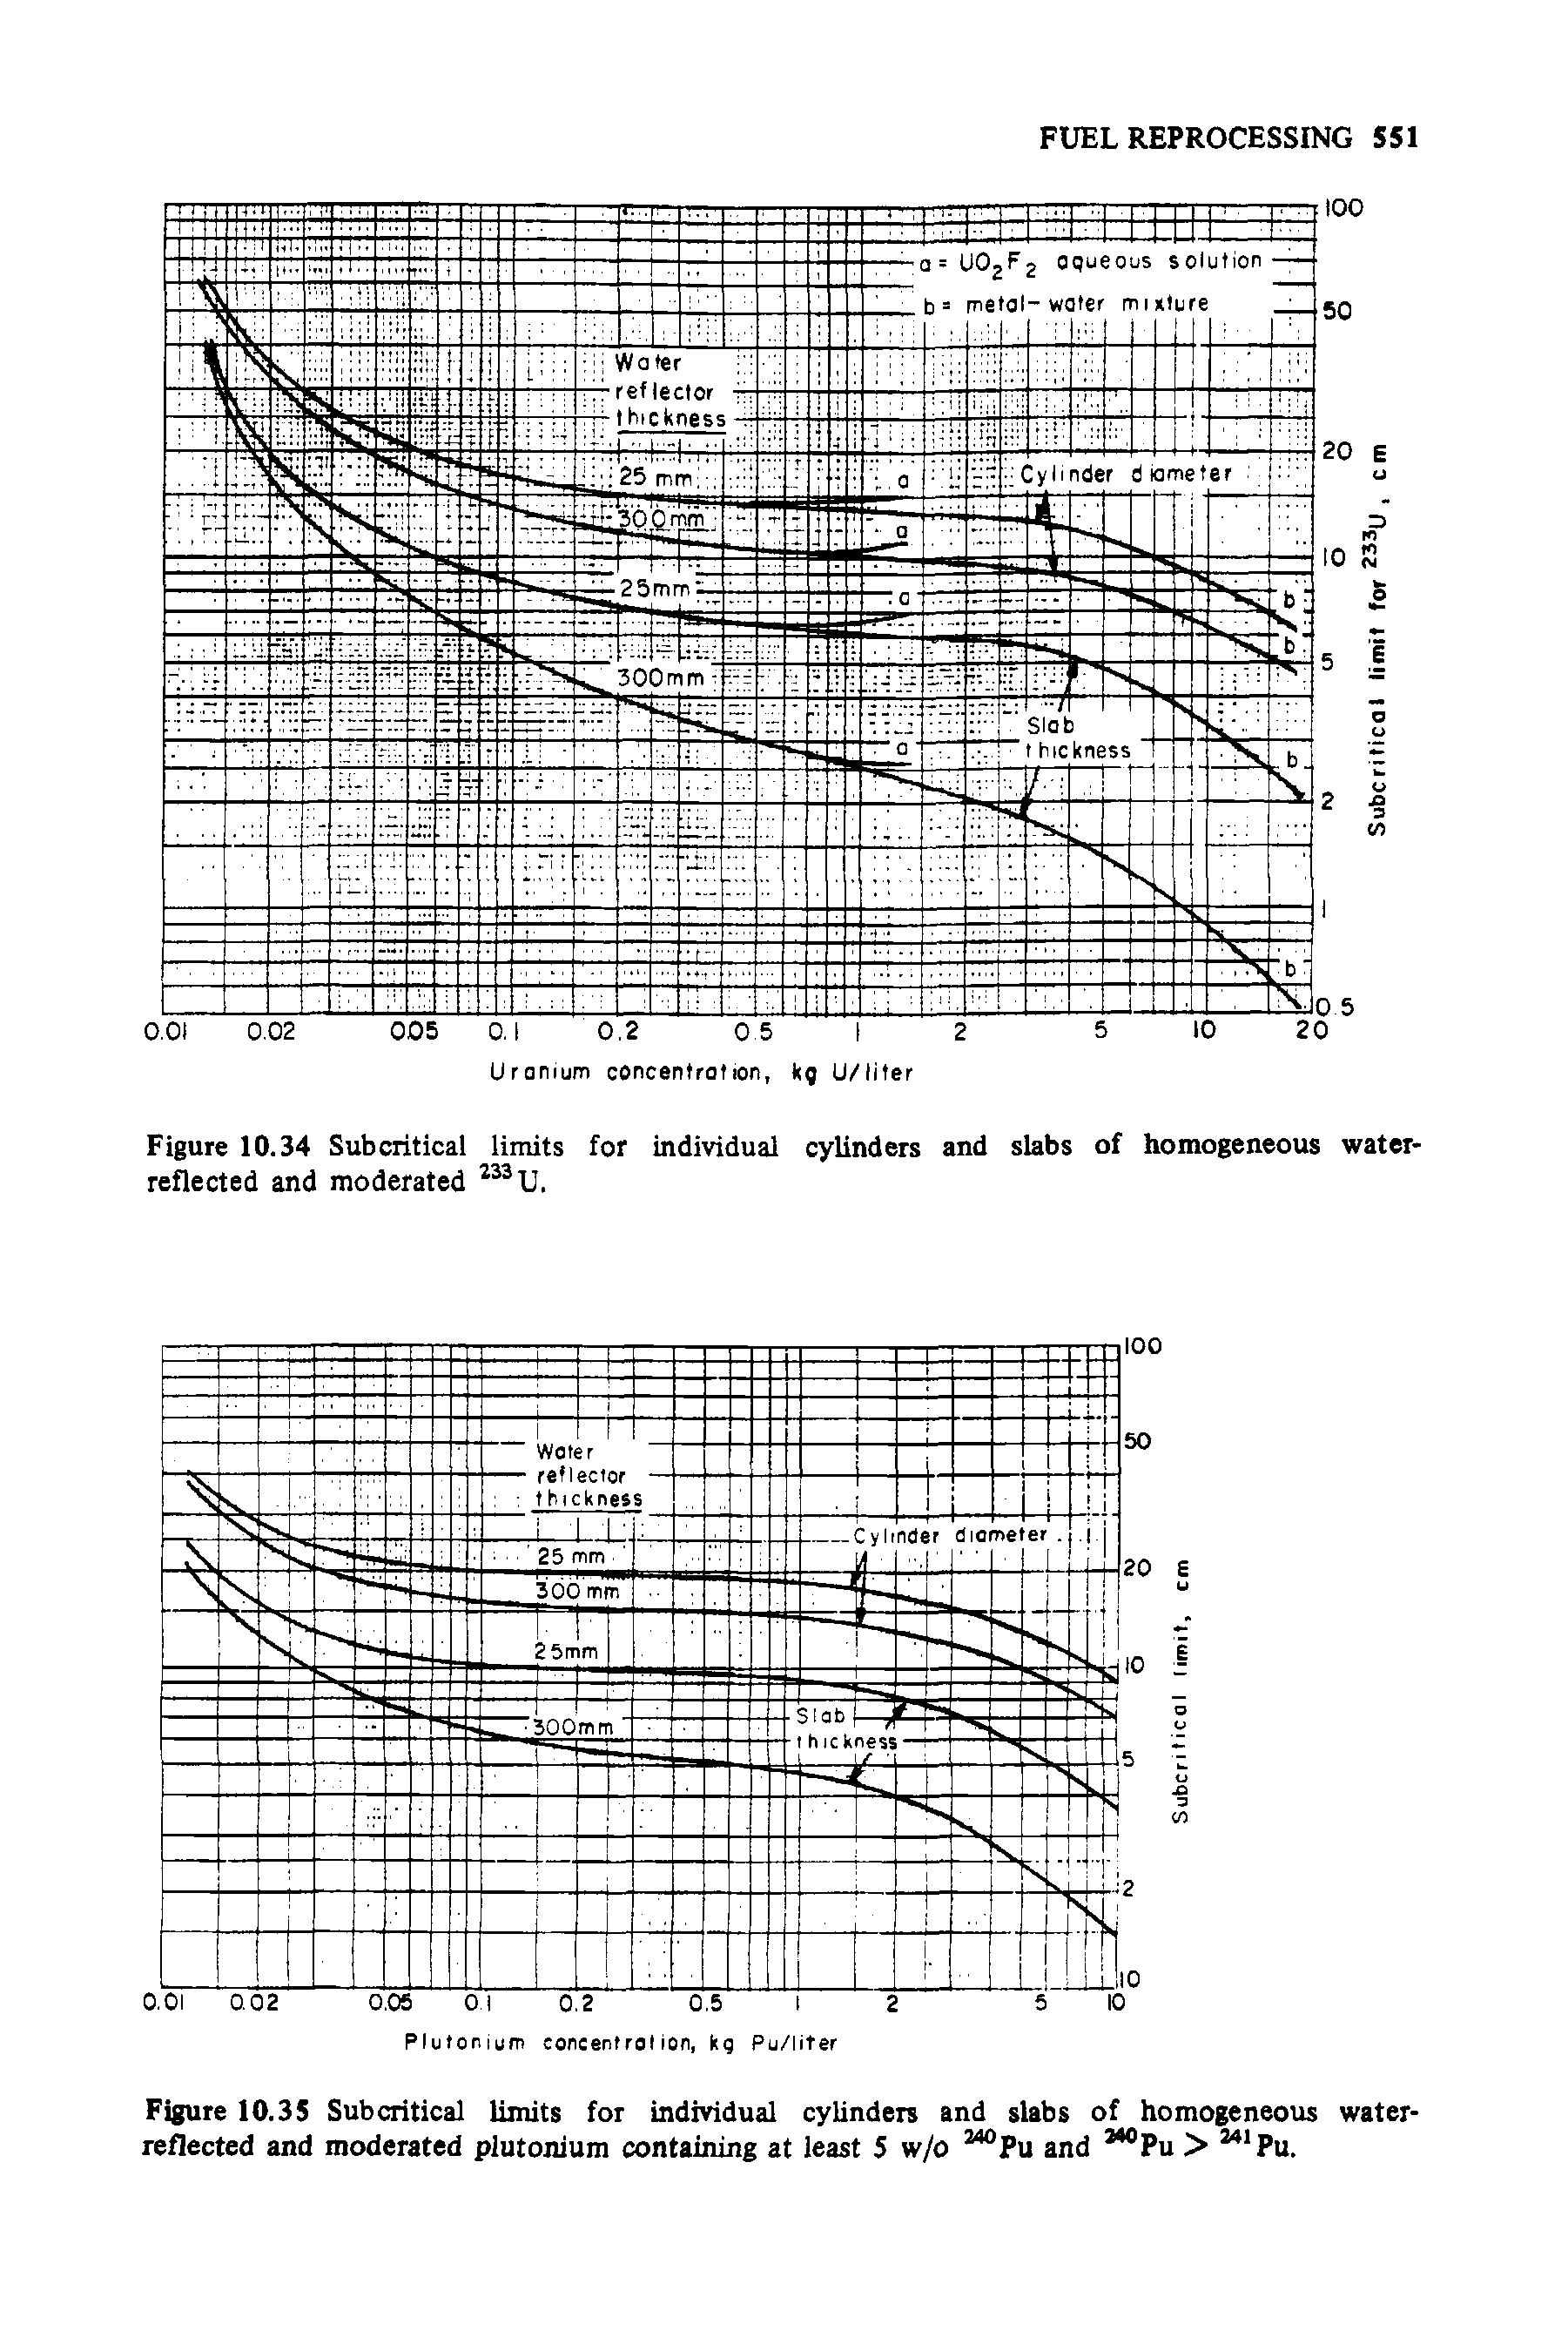 Figure 10.35 Subcritical limits for individual cylinders and slabs of homogeneous water-reflected and moderated plutonium containing at least 5 w/o °Pu and Pu > Pu.